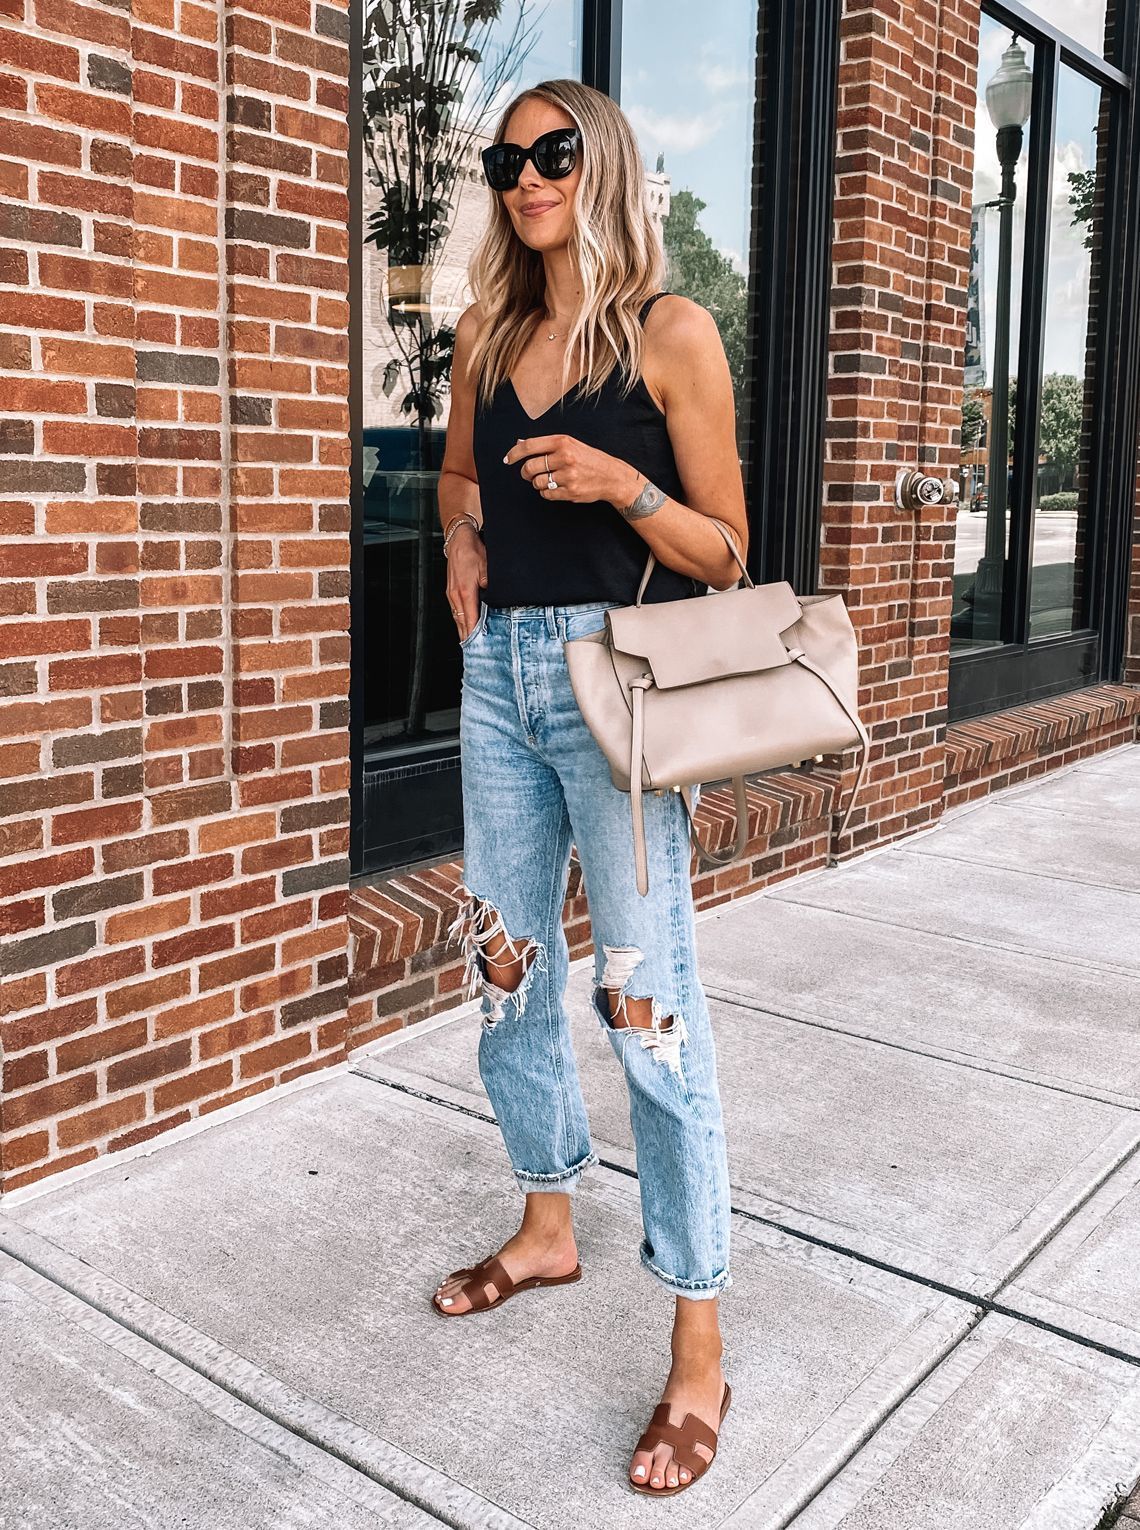 My Favorite AGOLDE Ripped Jeans | Fashion Jackson - My Favorite AGOLDE Ripped Jeans | Fashion Jackson -   19 style Summer jeans ideas